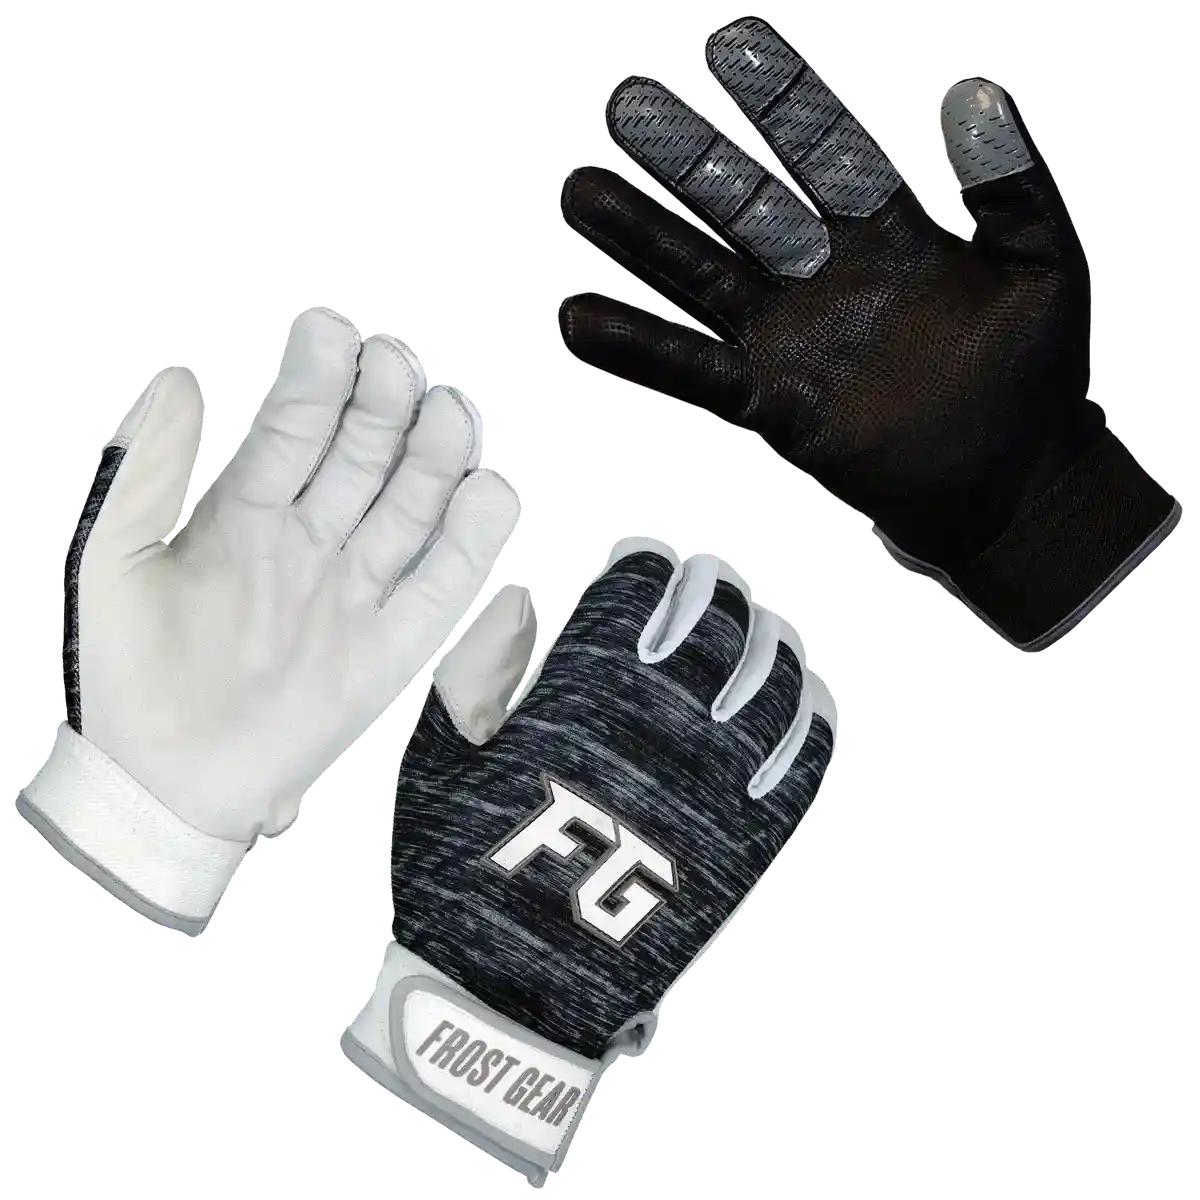 FG Package Deal: Baseball Throwing Glove &amp; Pair of Batting Gloves